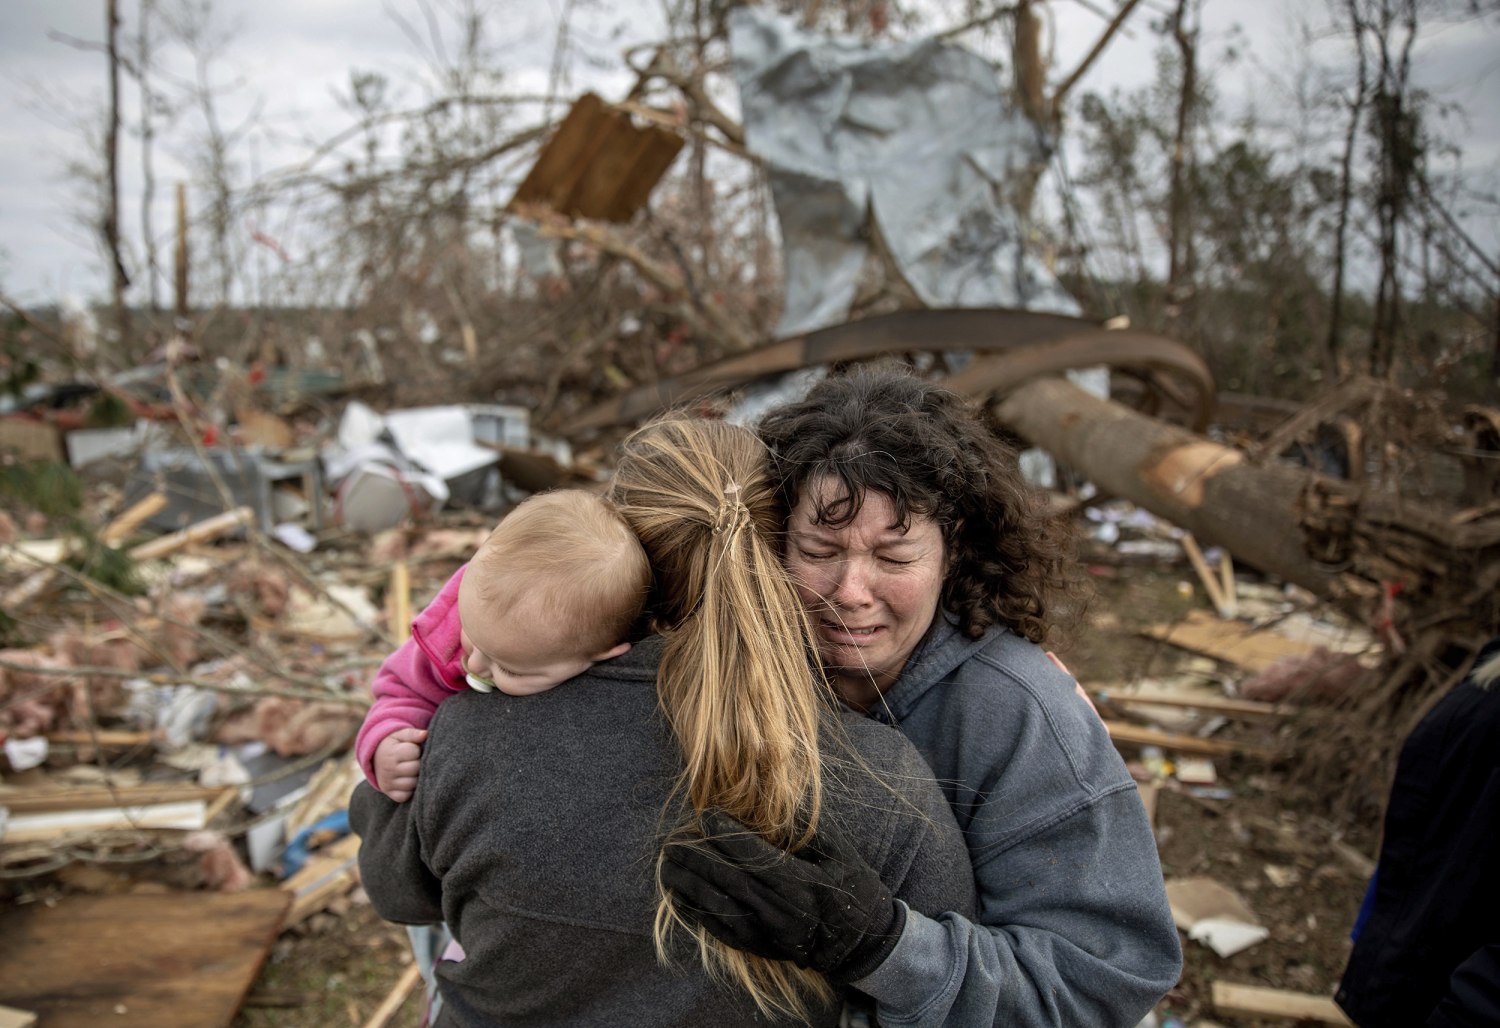 Tornado victims in Alabama include the 'sweetest little boy' and a